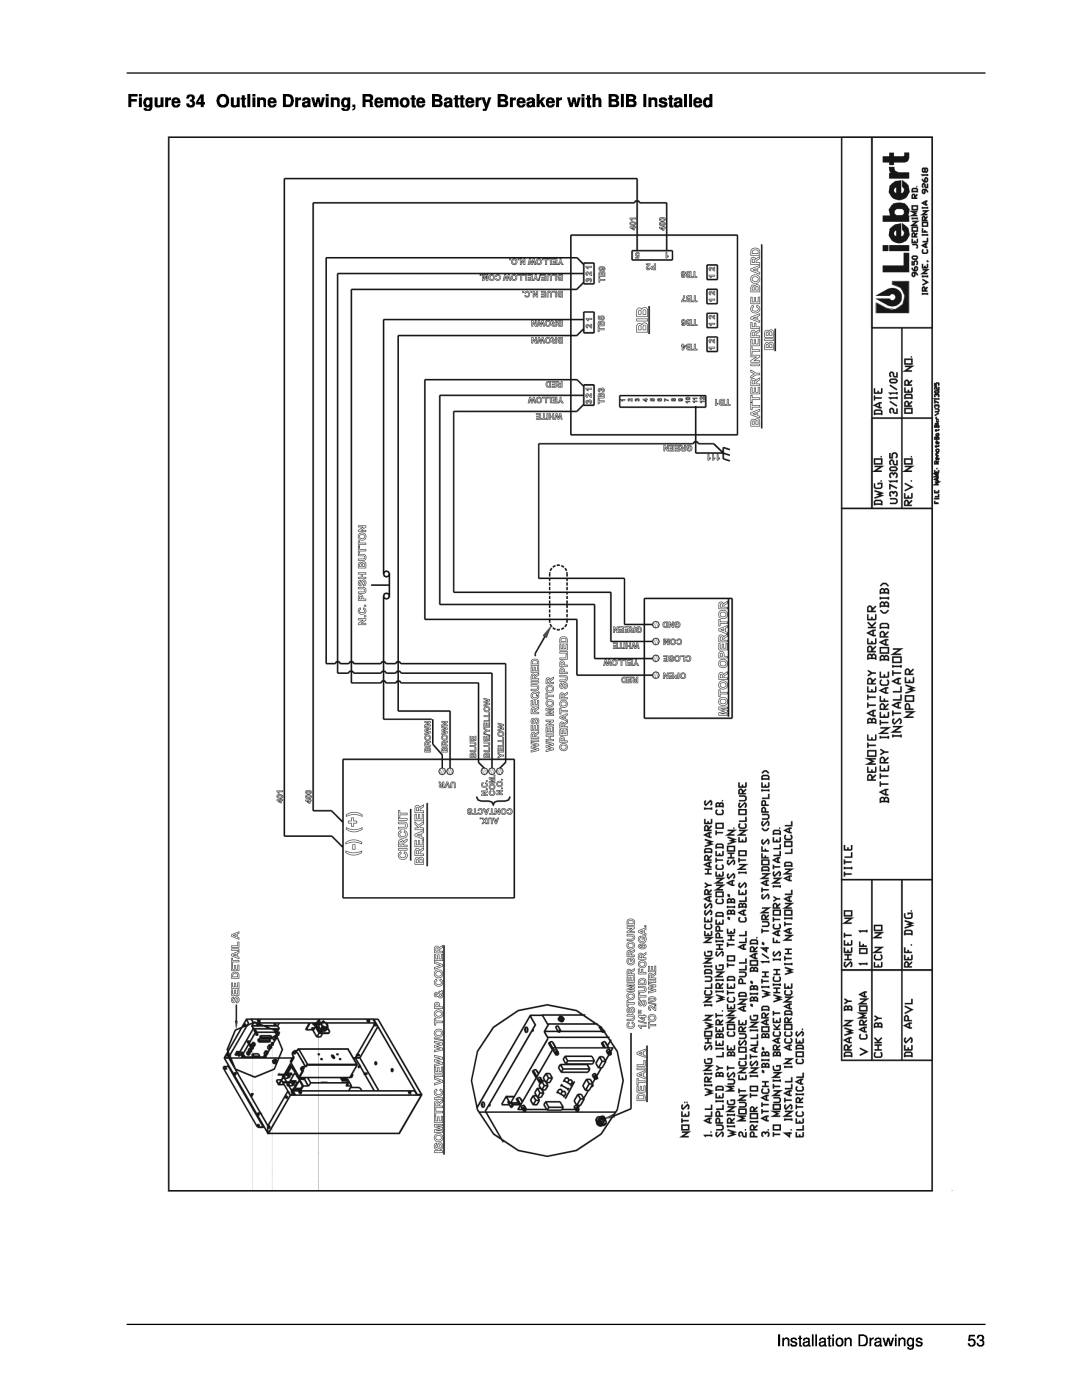 Emerson 30-130 kVA installation manual Outline Drawing, Remote Battery Breaker with BIB Installed, Installation Drawings 